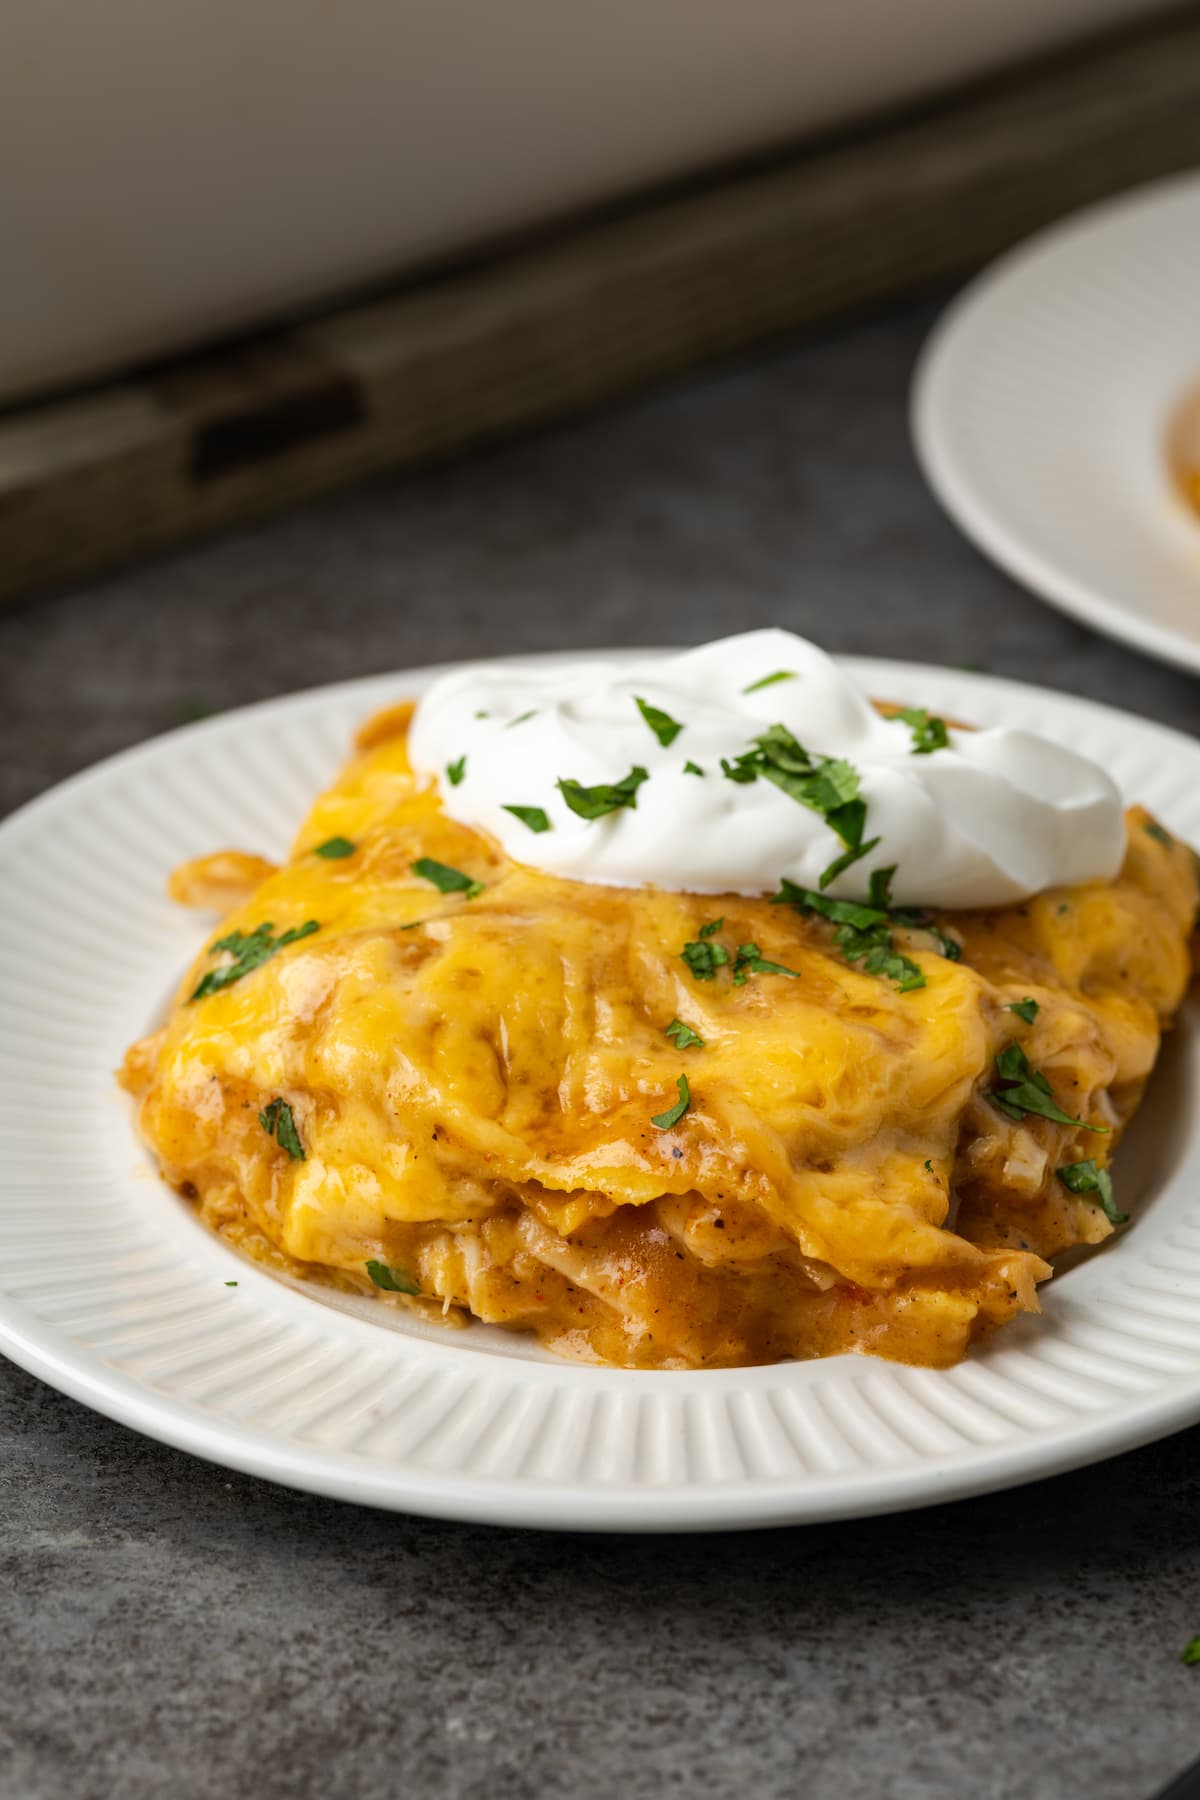 A serving of King Ranch chicken topped with sour cream on a plate.